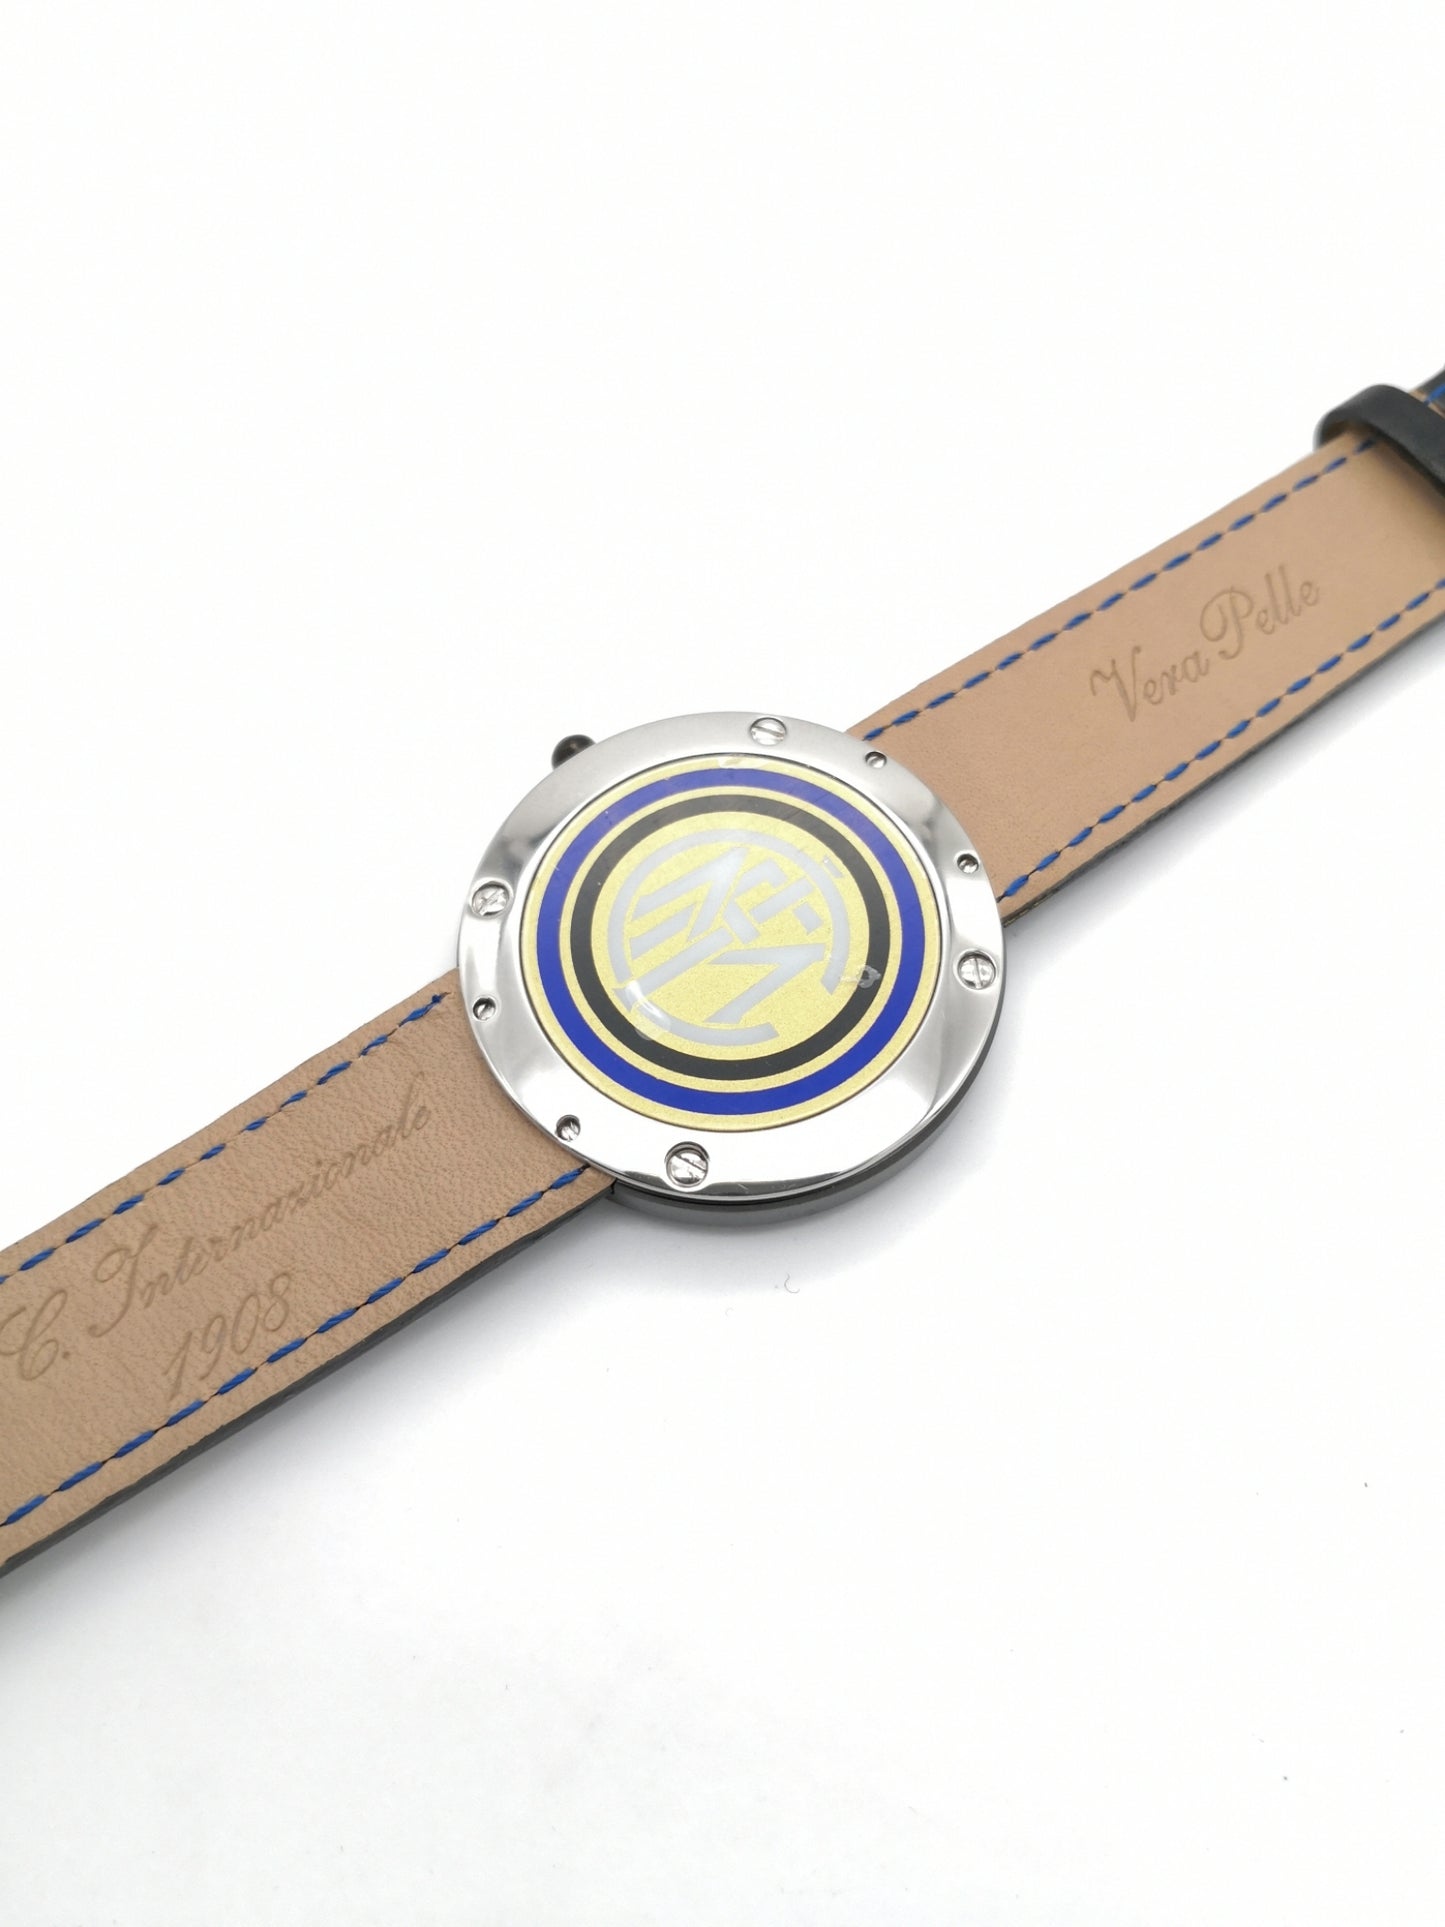 FC Inter - Official watch celebrating the European champions